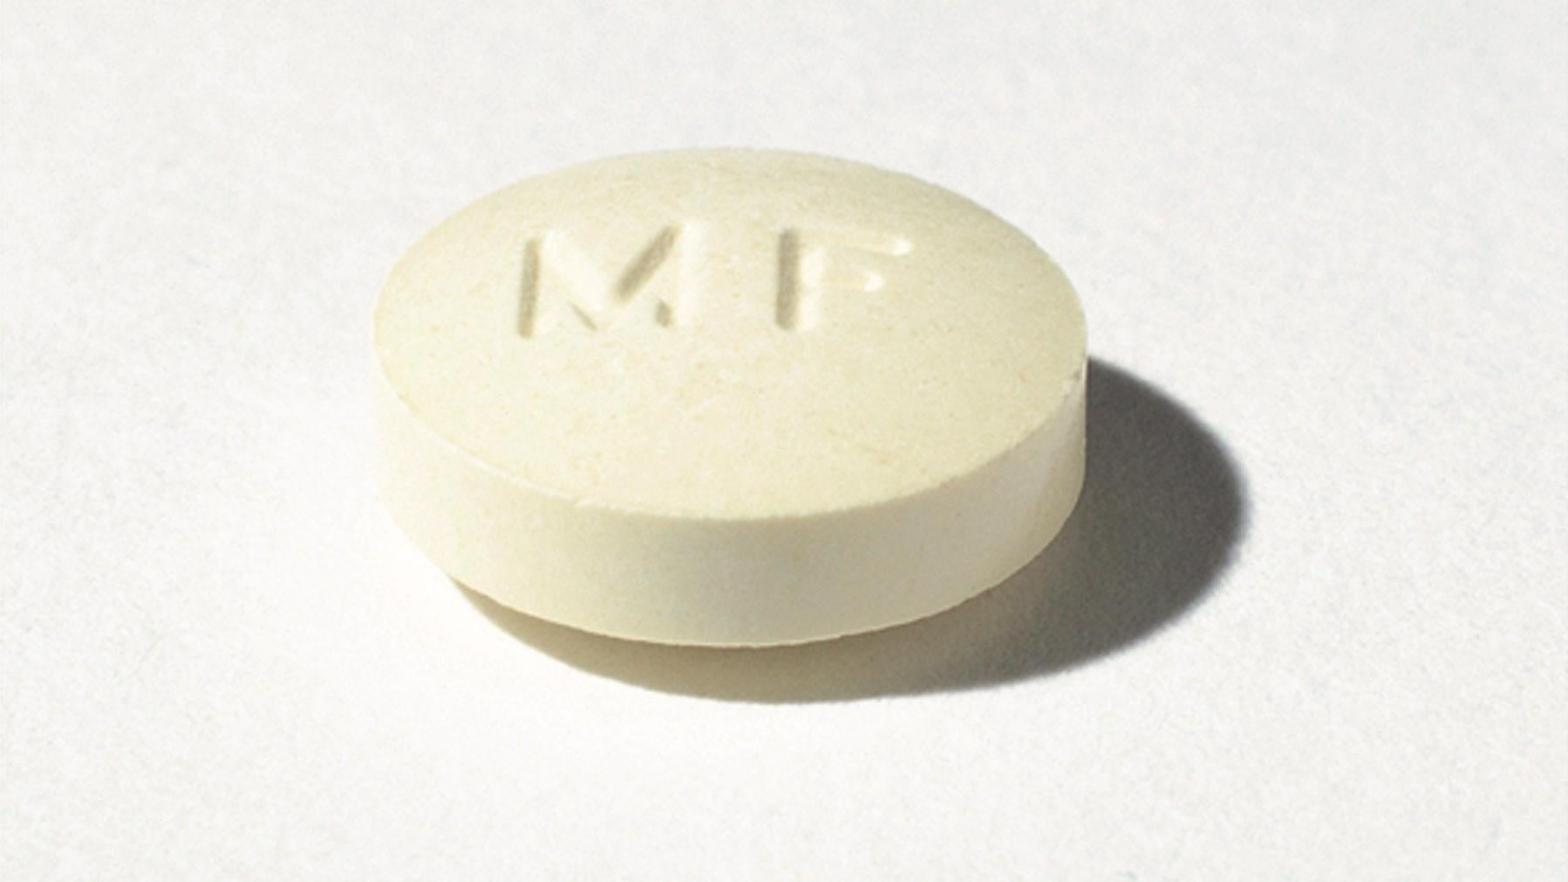 A pill of mifepristone (Photo: Newsmakers, Getty Images)